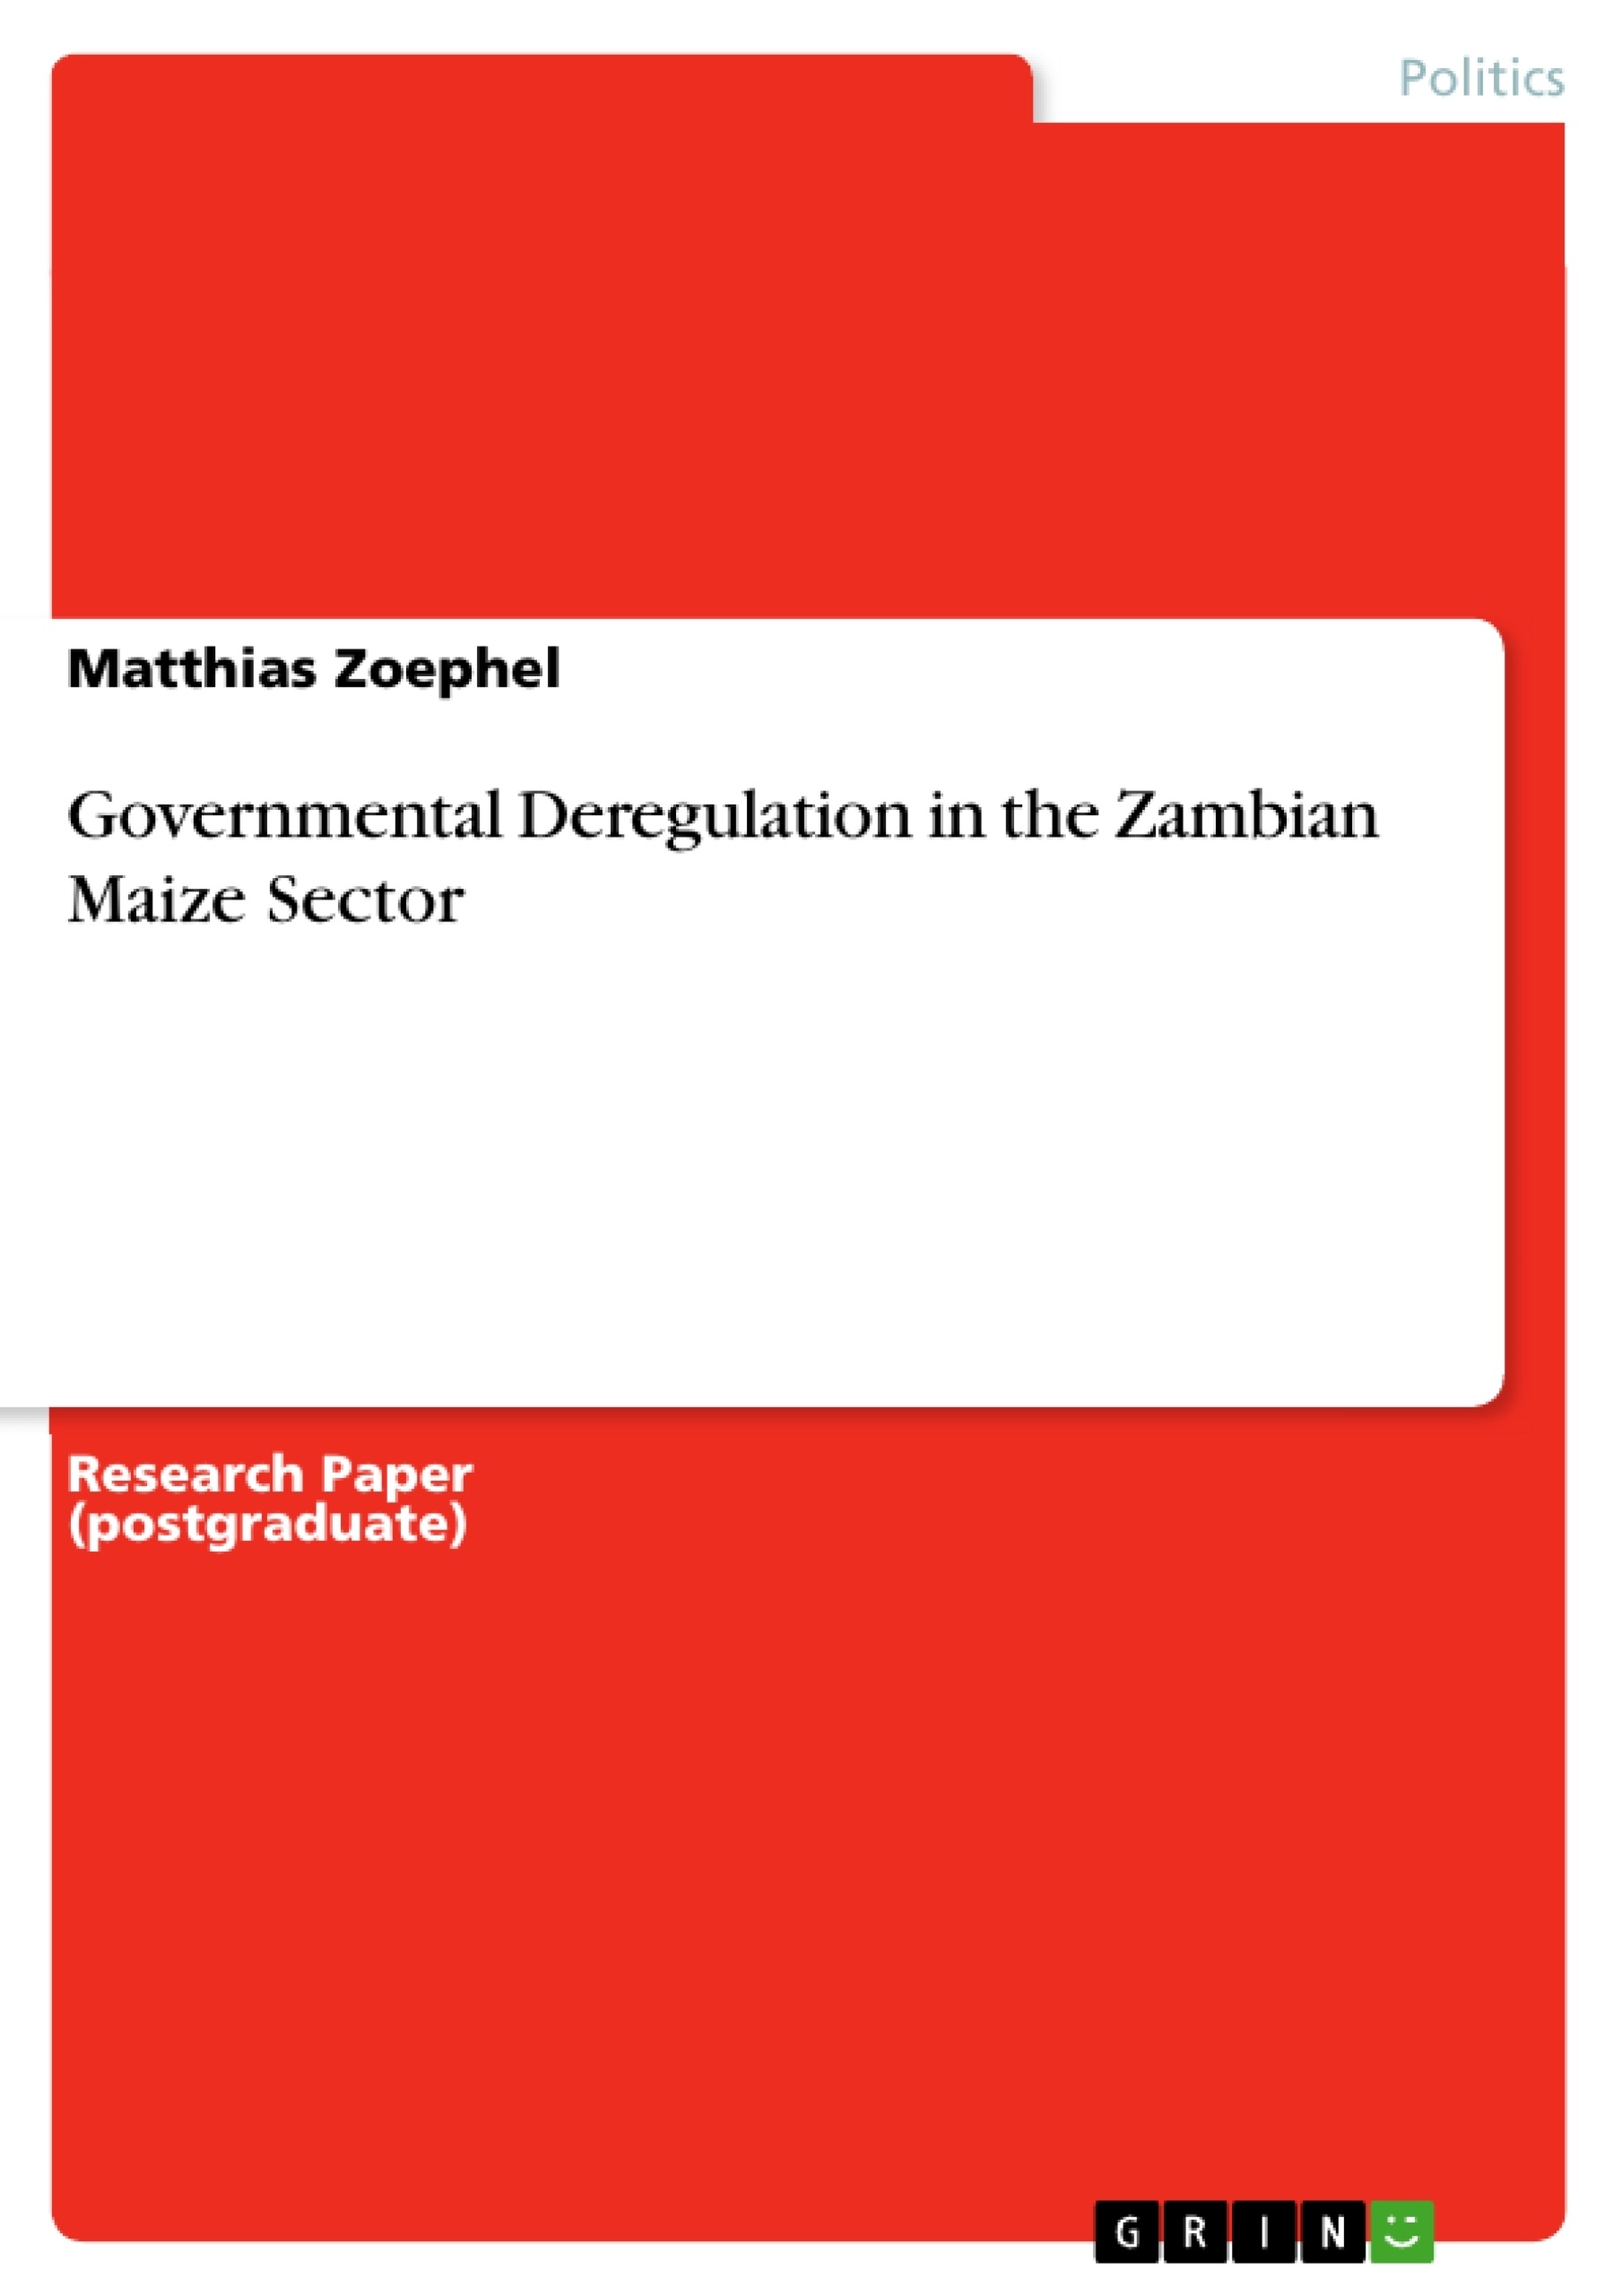 Titre: Governmental Deregulation in the Zambian Maize Sector